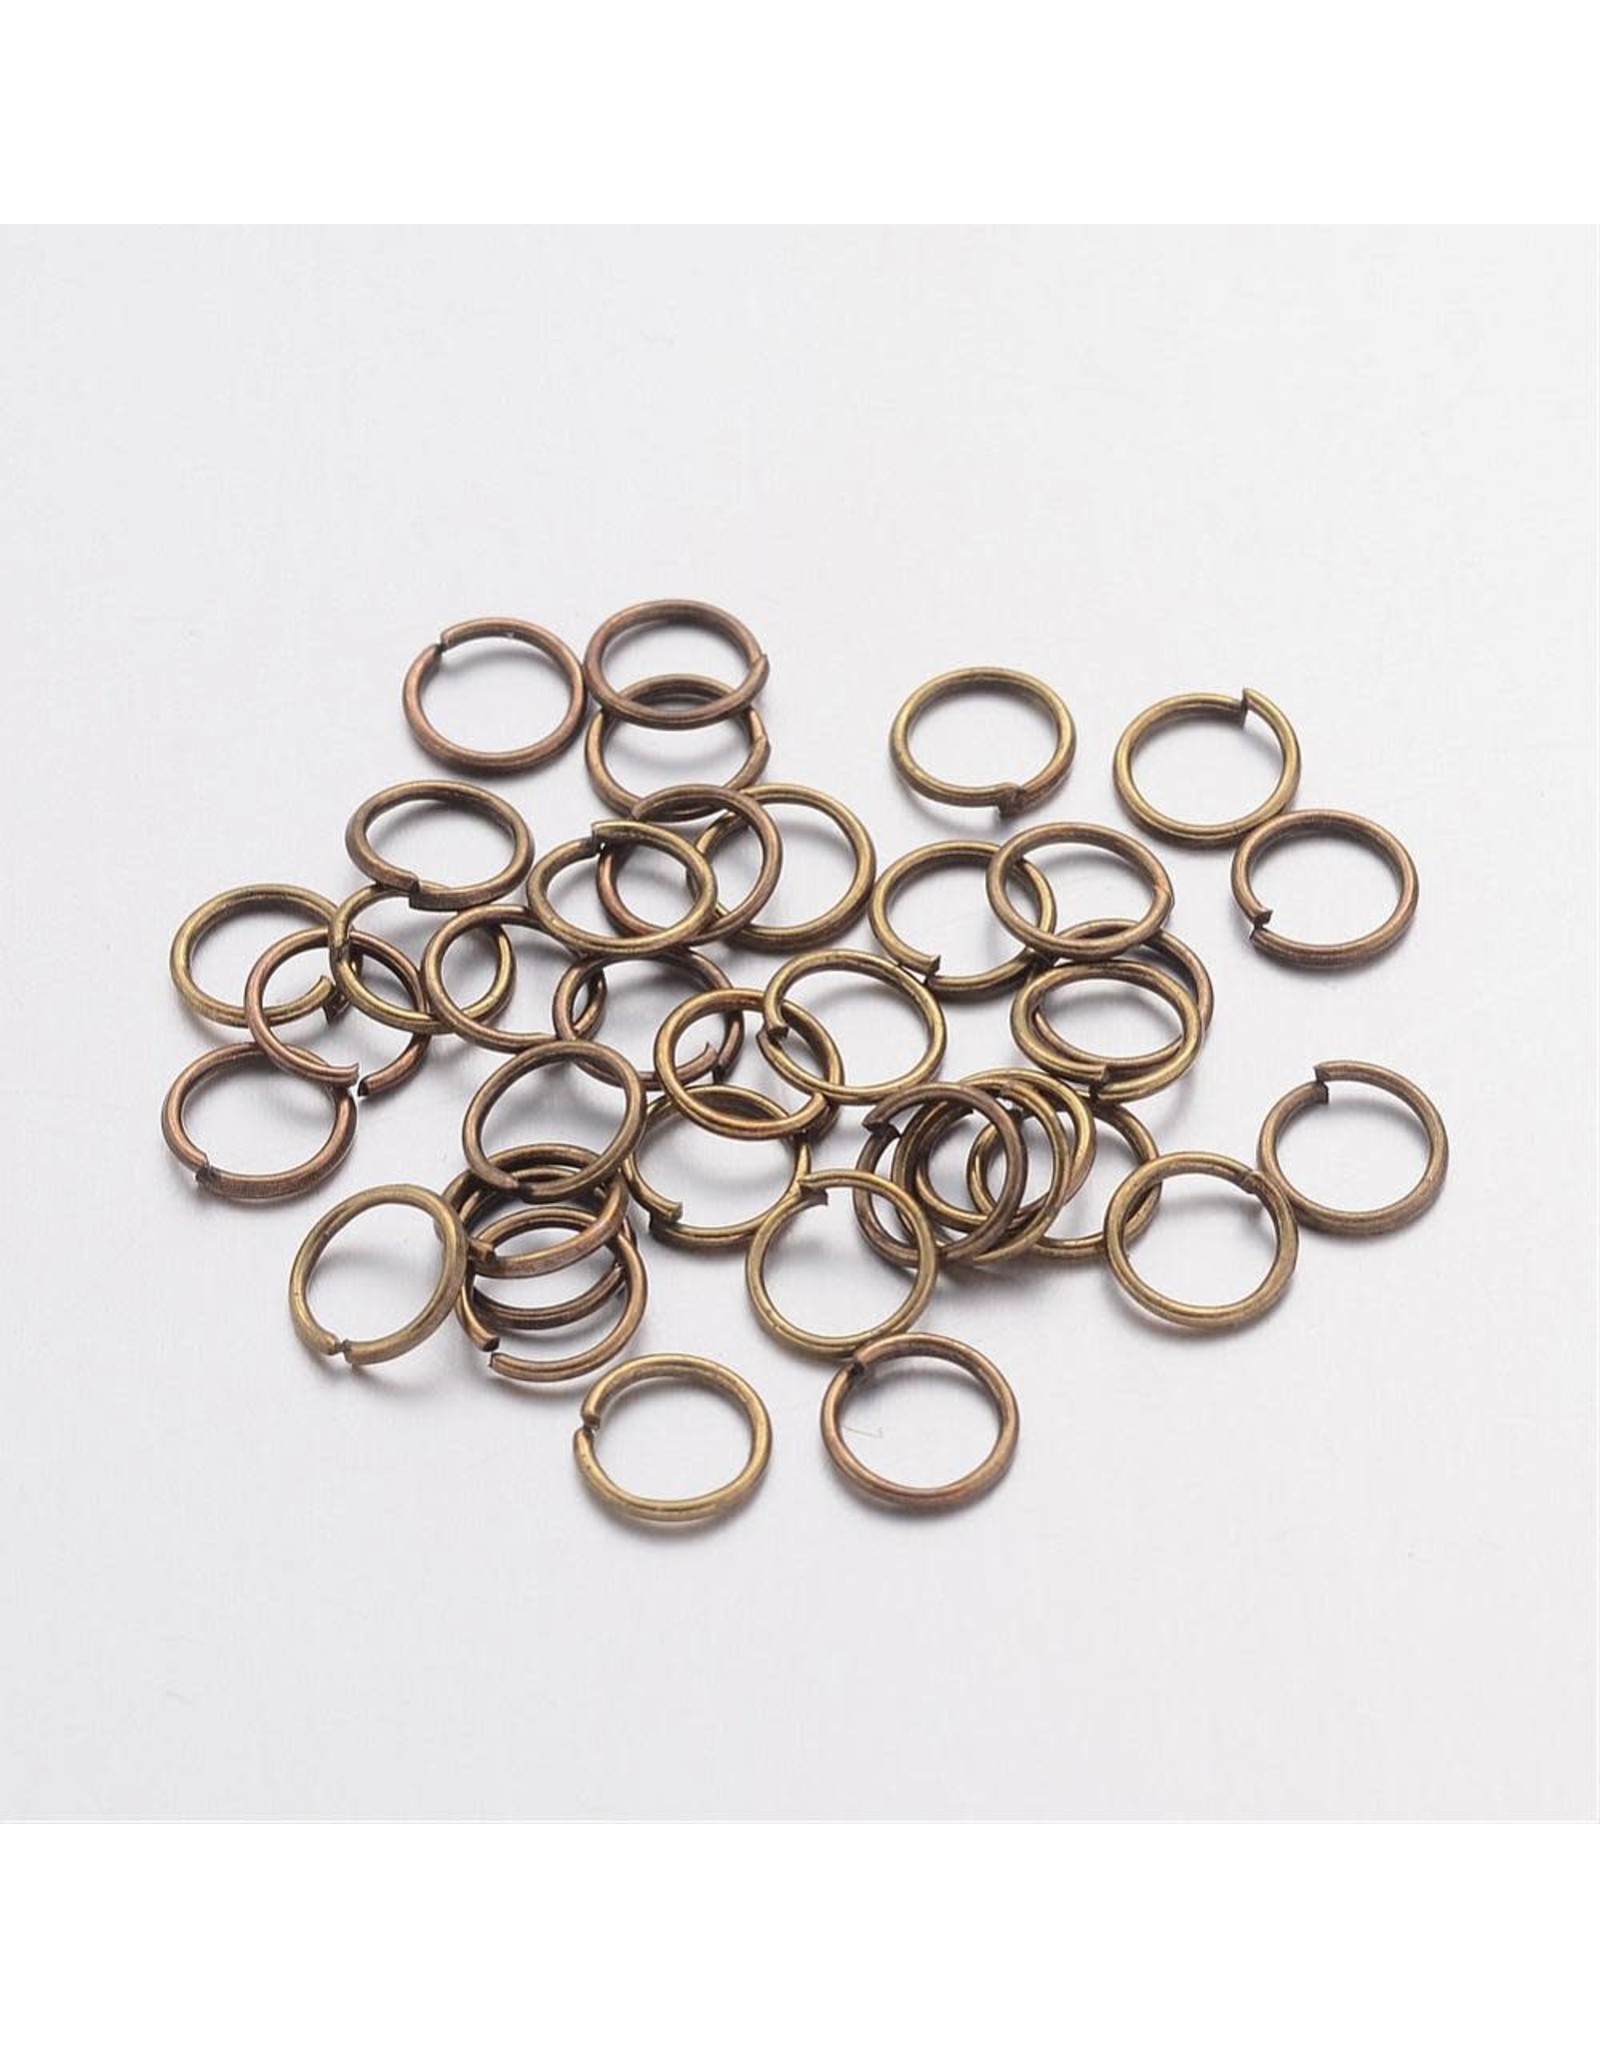 Jump Ring 6mm Antique Brass  approx 22g  x500 NF